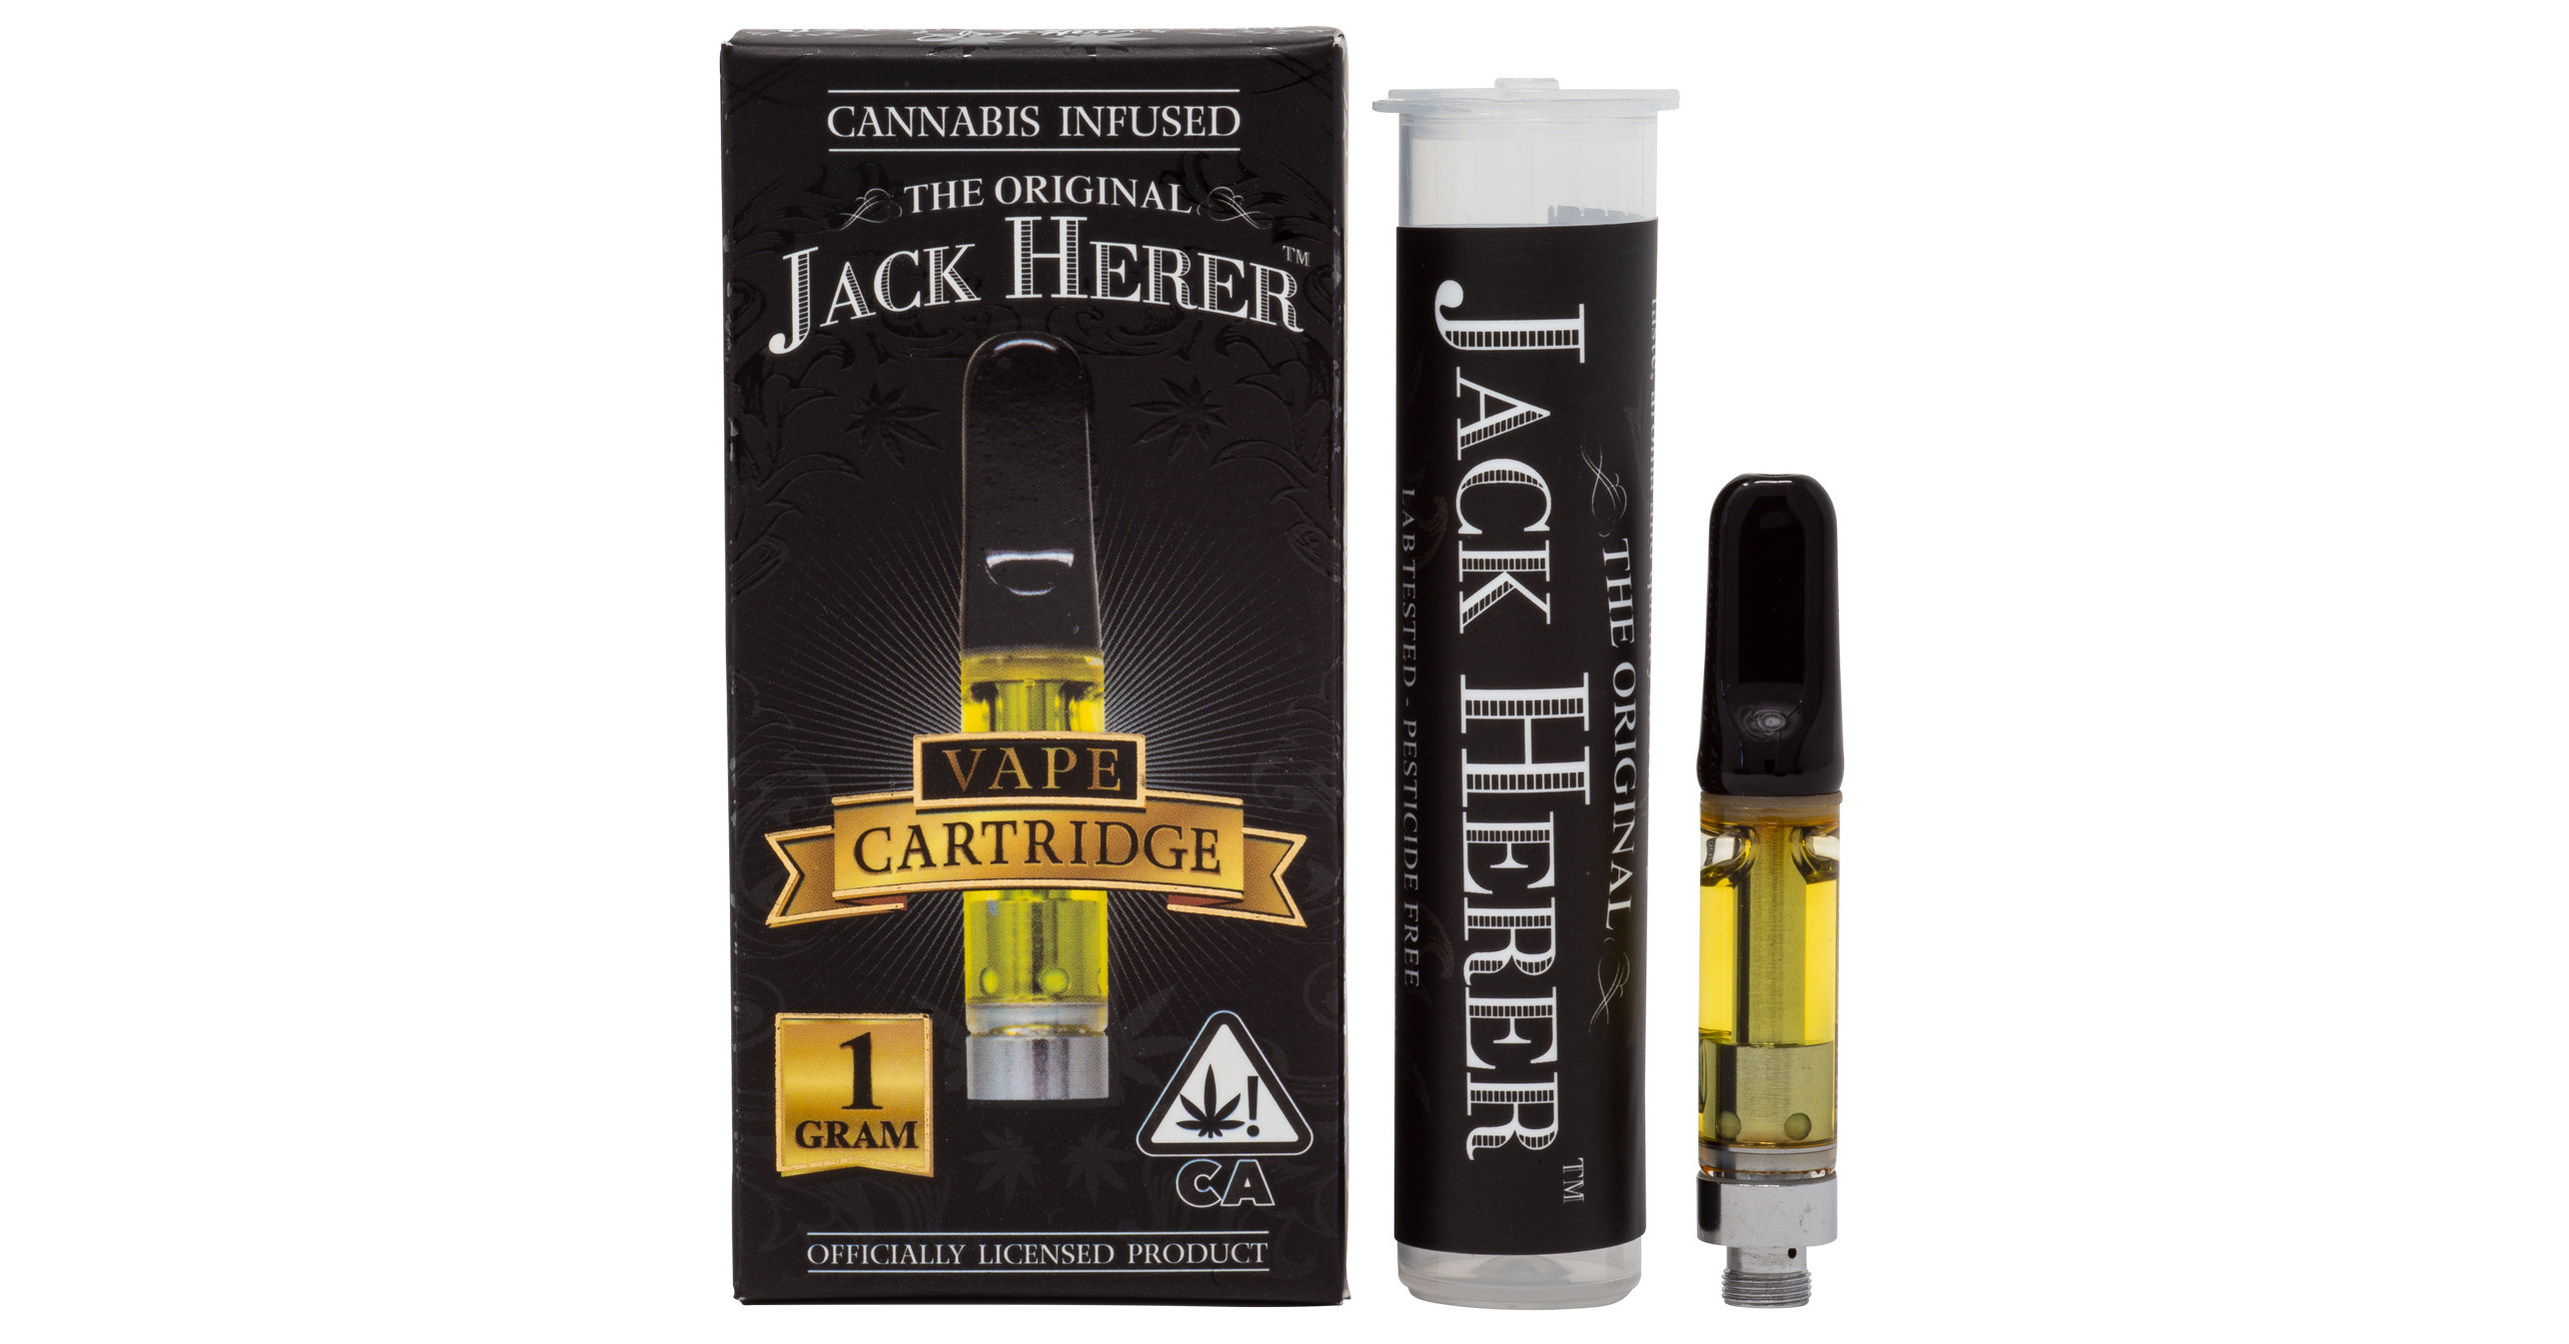 The Original Jack Herer cannabis oil took first place in the Distillate cat...